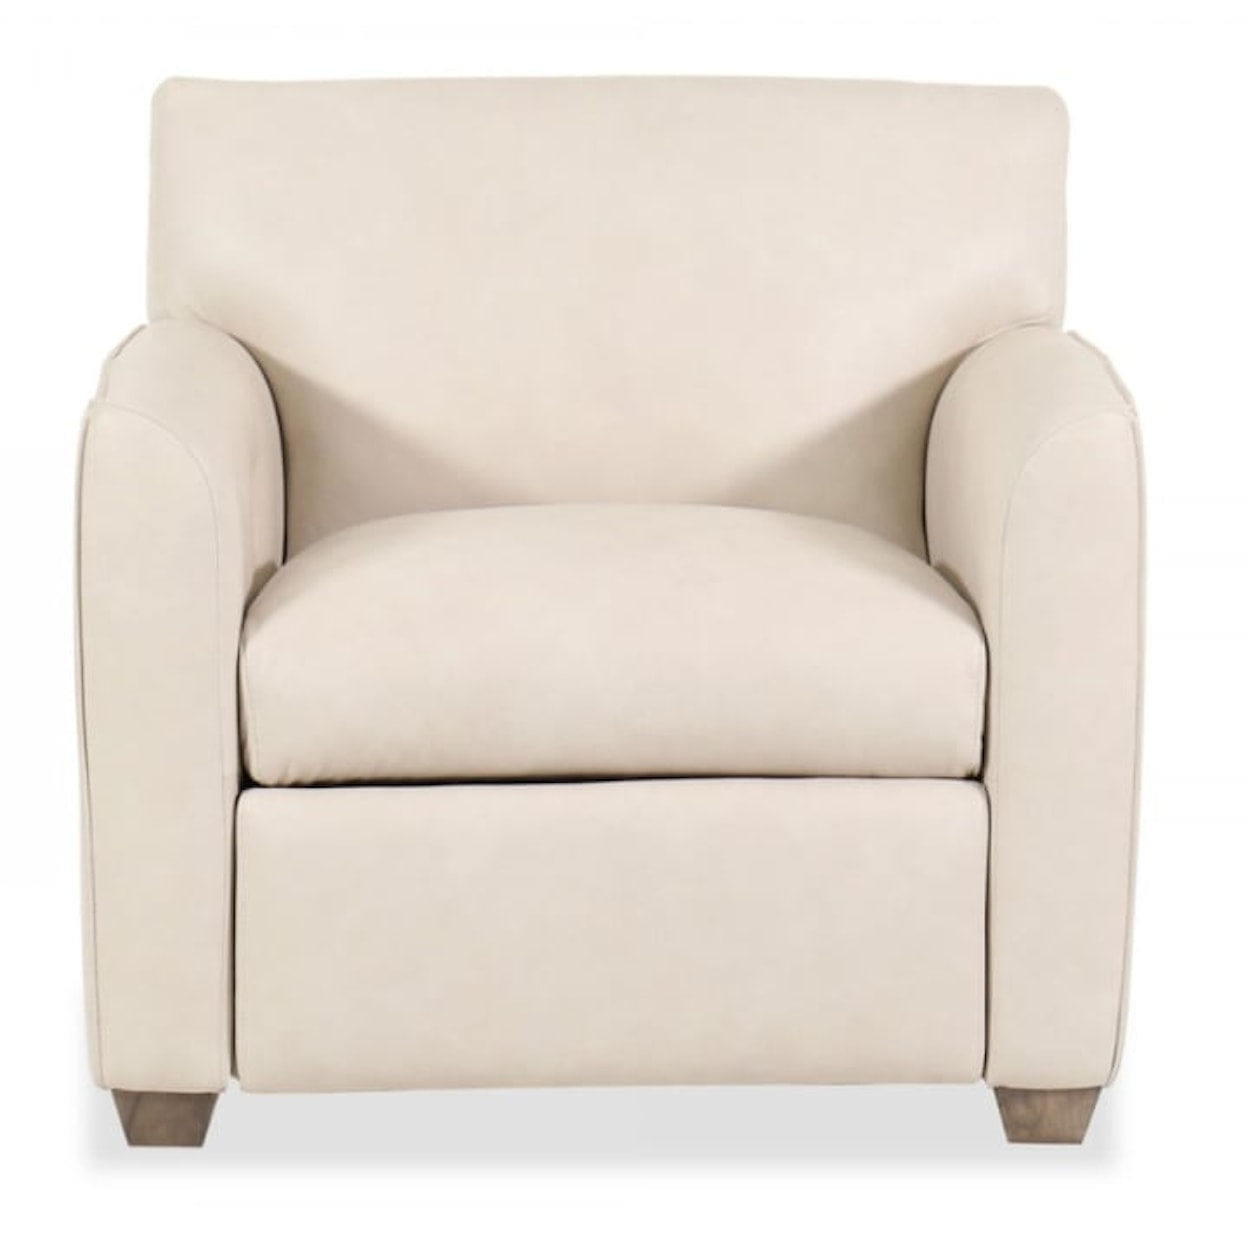 Bernhardt Chairs and Accents Sloan Power Motion Chair